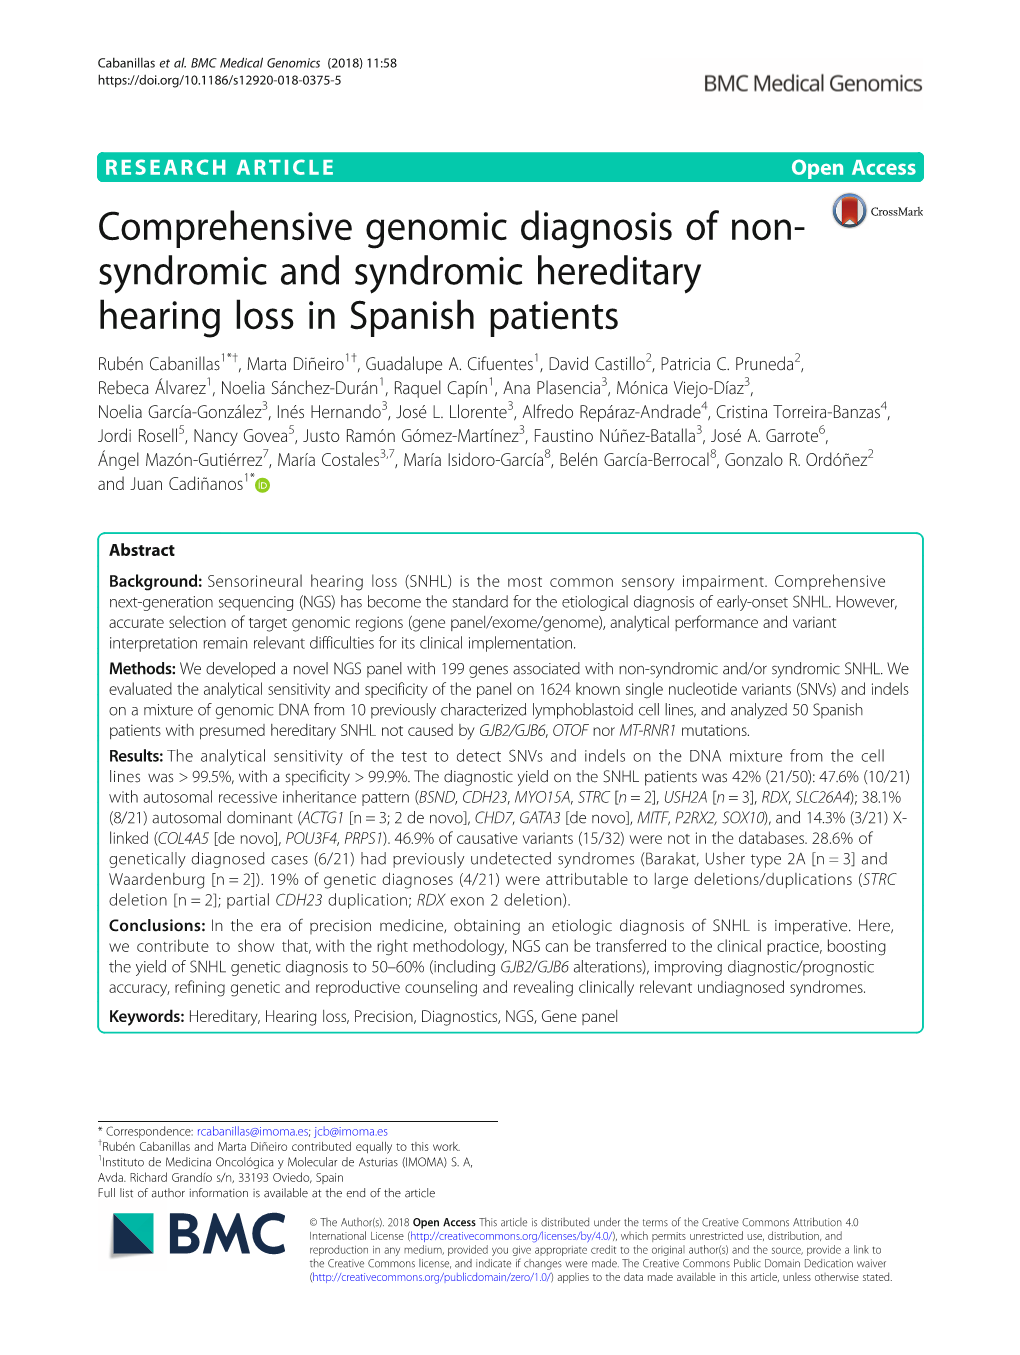 Comprehensive Genomic Diagnosis of Non-Syndromic and Syndromic